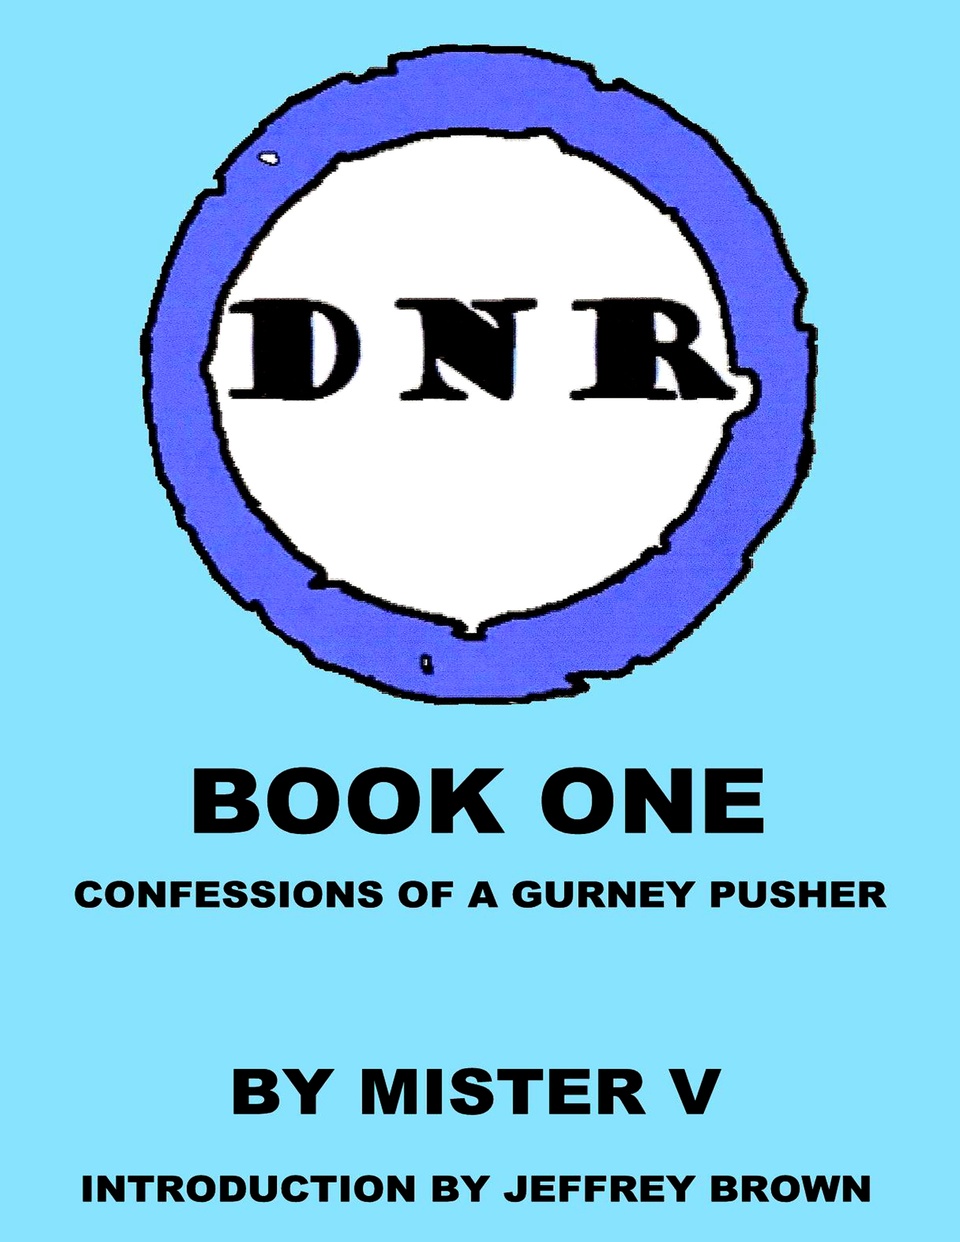 DNR Book One: Confessions of a Gurney Pusher